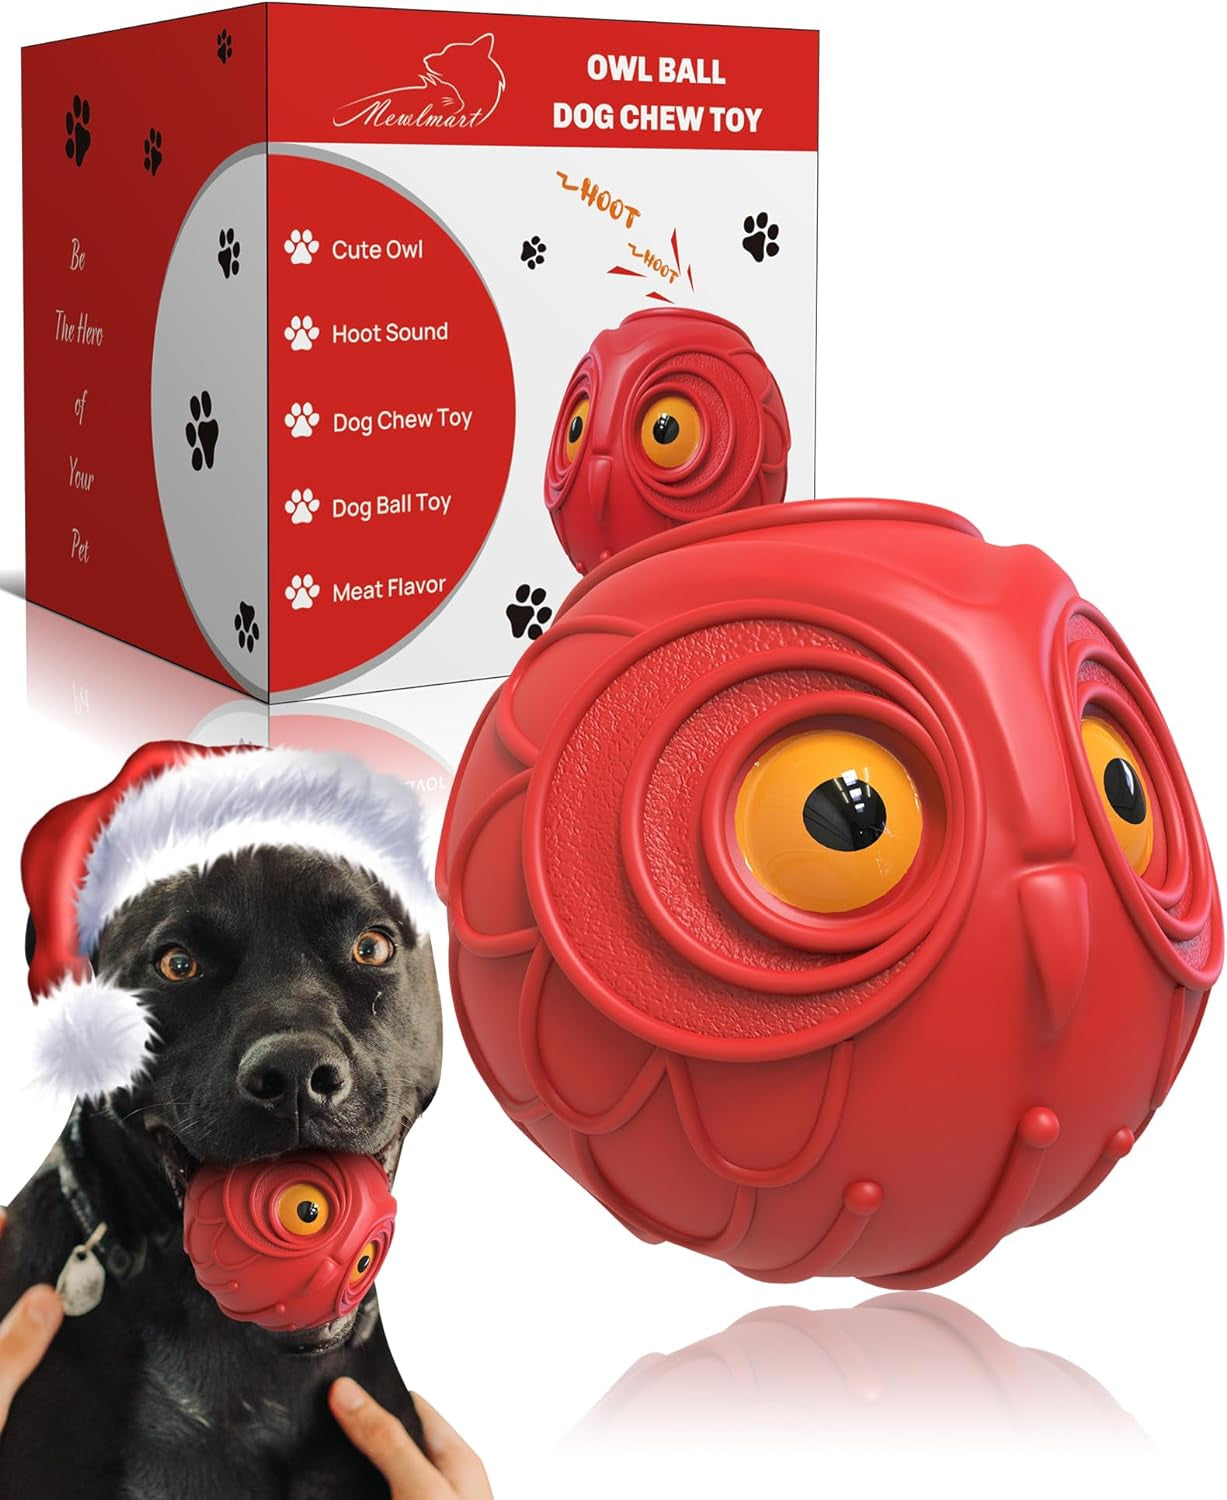 Giggle Ball for Dogs Indestructible Dog Toys for Aggressive Chewers Dog Ball Toy for Puppy Medium Large Dogs Natural Rubber Cute Owl Hoot Fun Giggle Sounds When Rolled or Shaken (Red Owl)